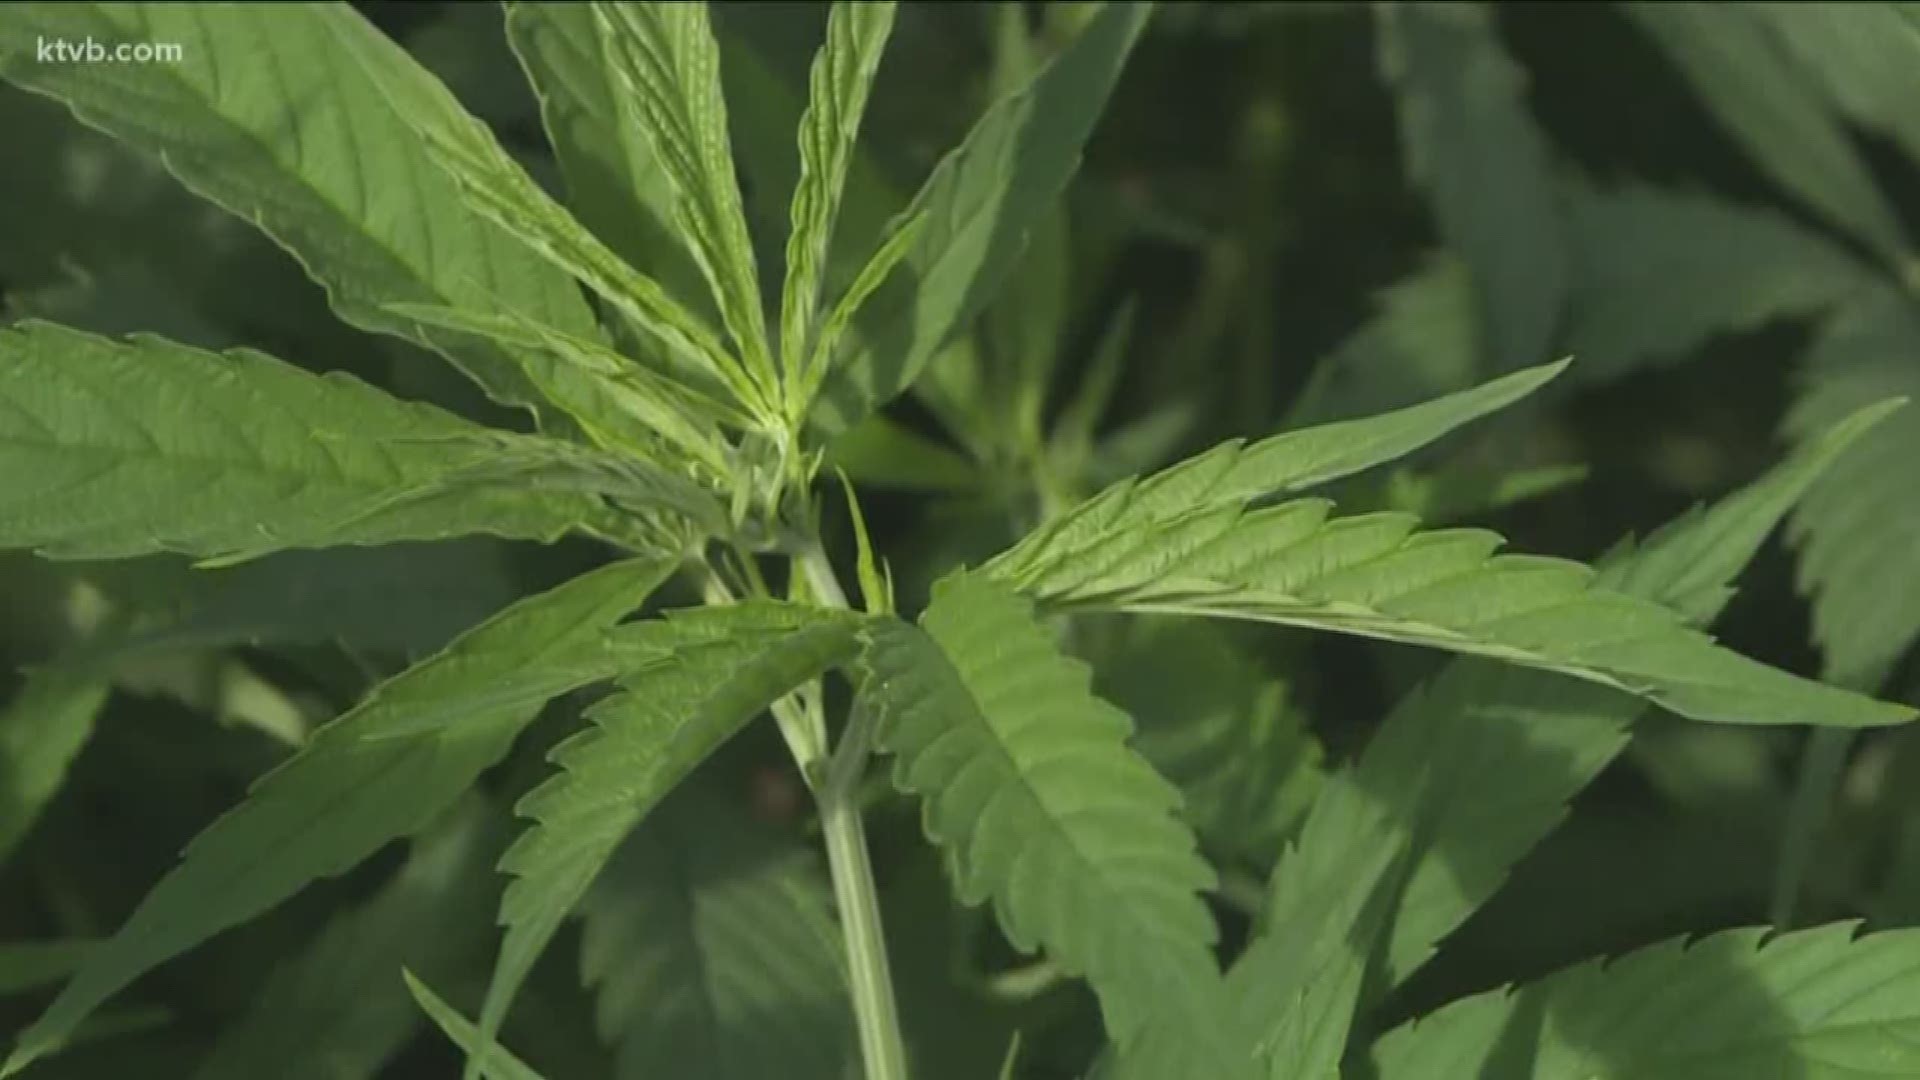 A bill that would legalize hemp by aligning Idaho state law with the federal Farm Bill has passed the House.